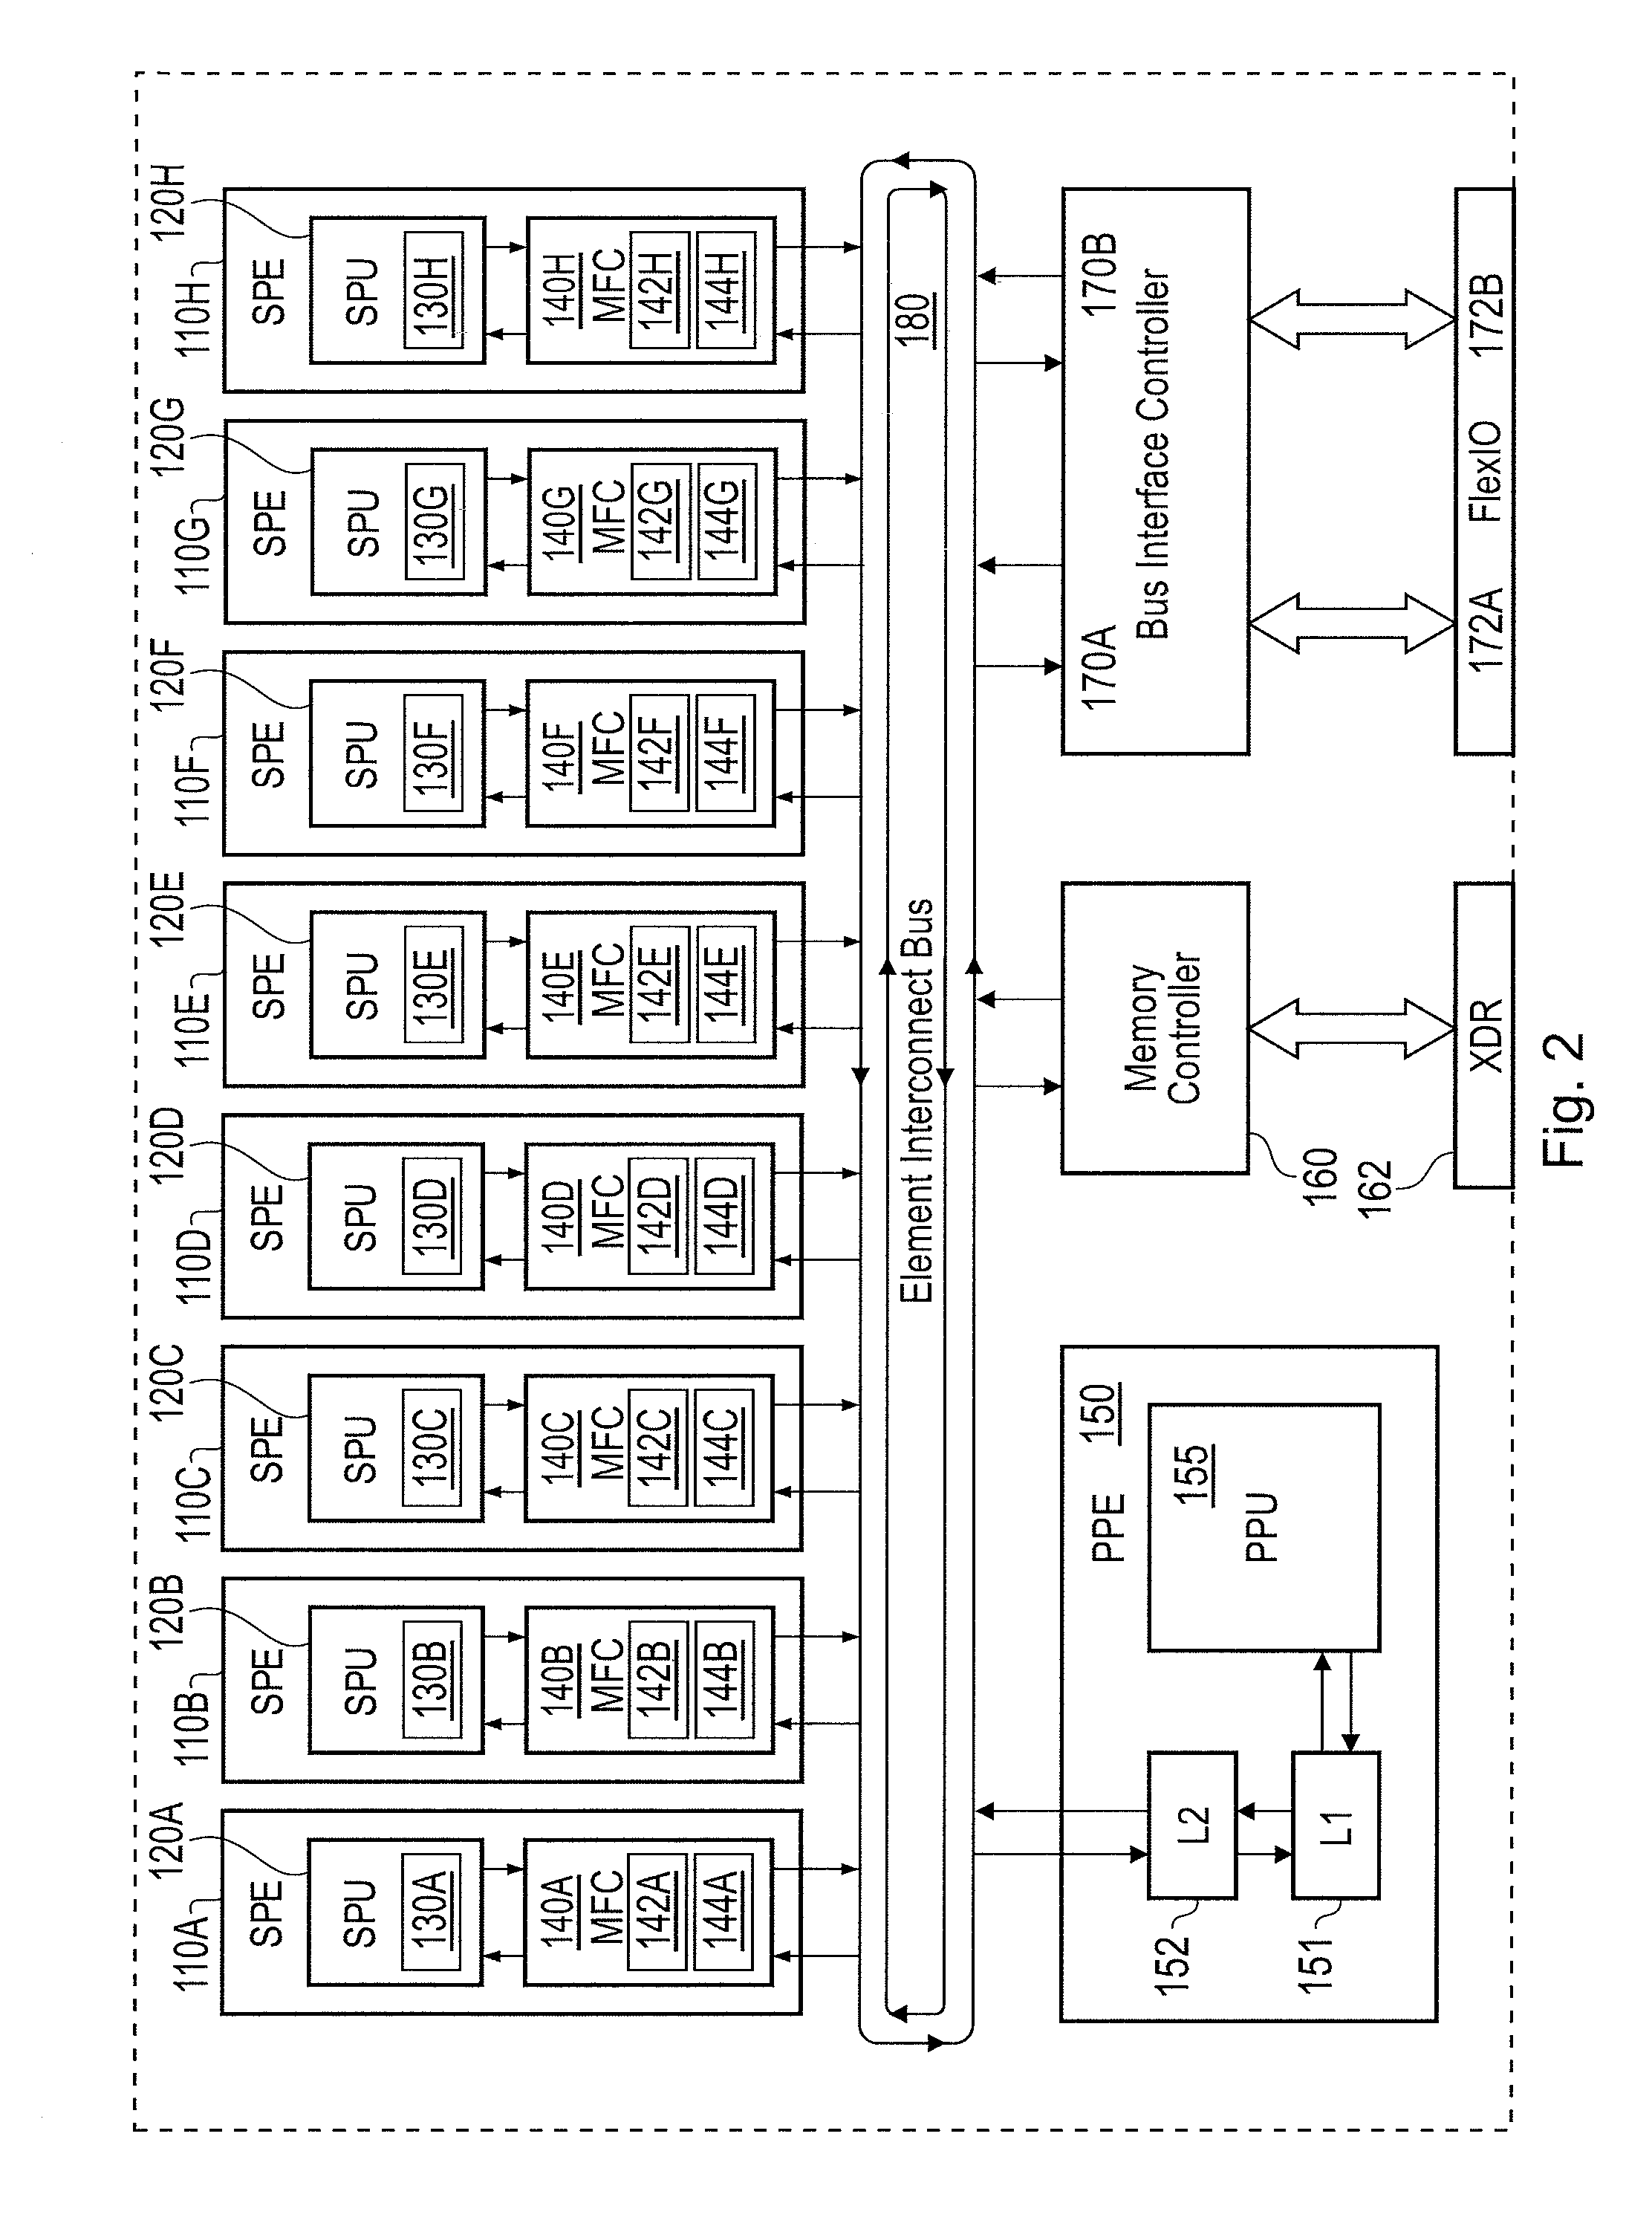 Apparatus and method of on-line transaction